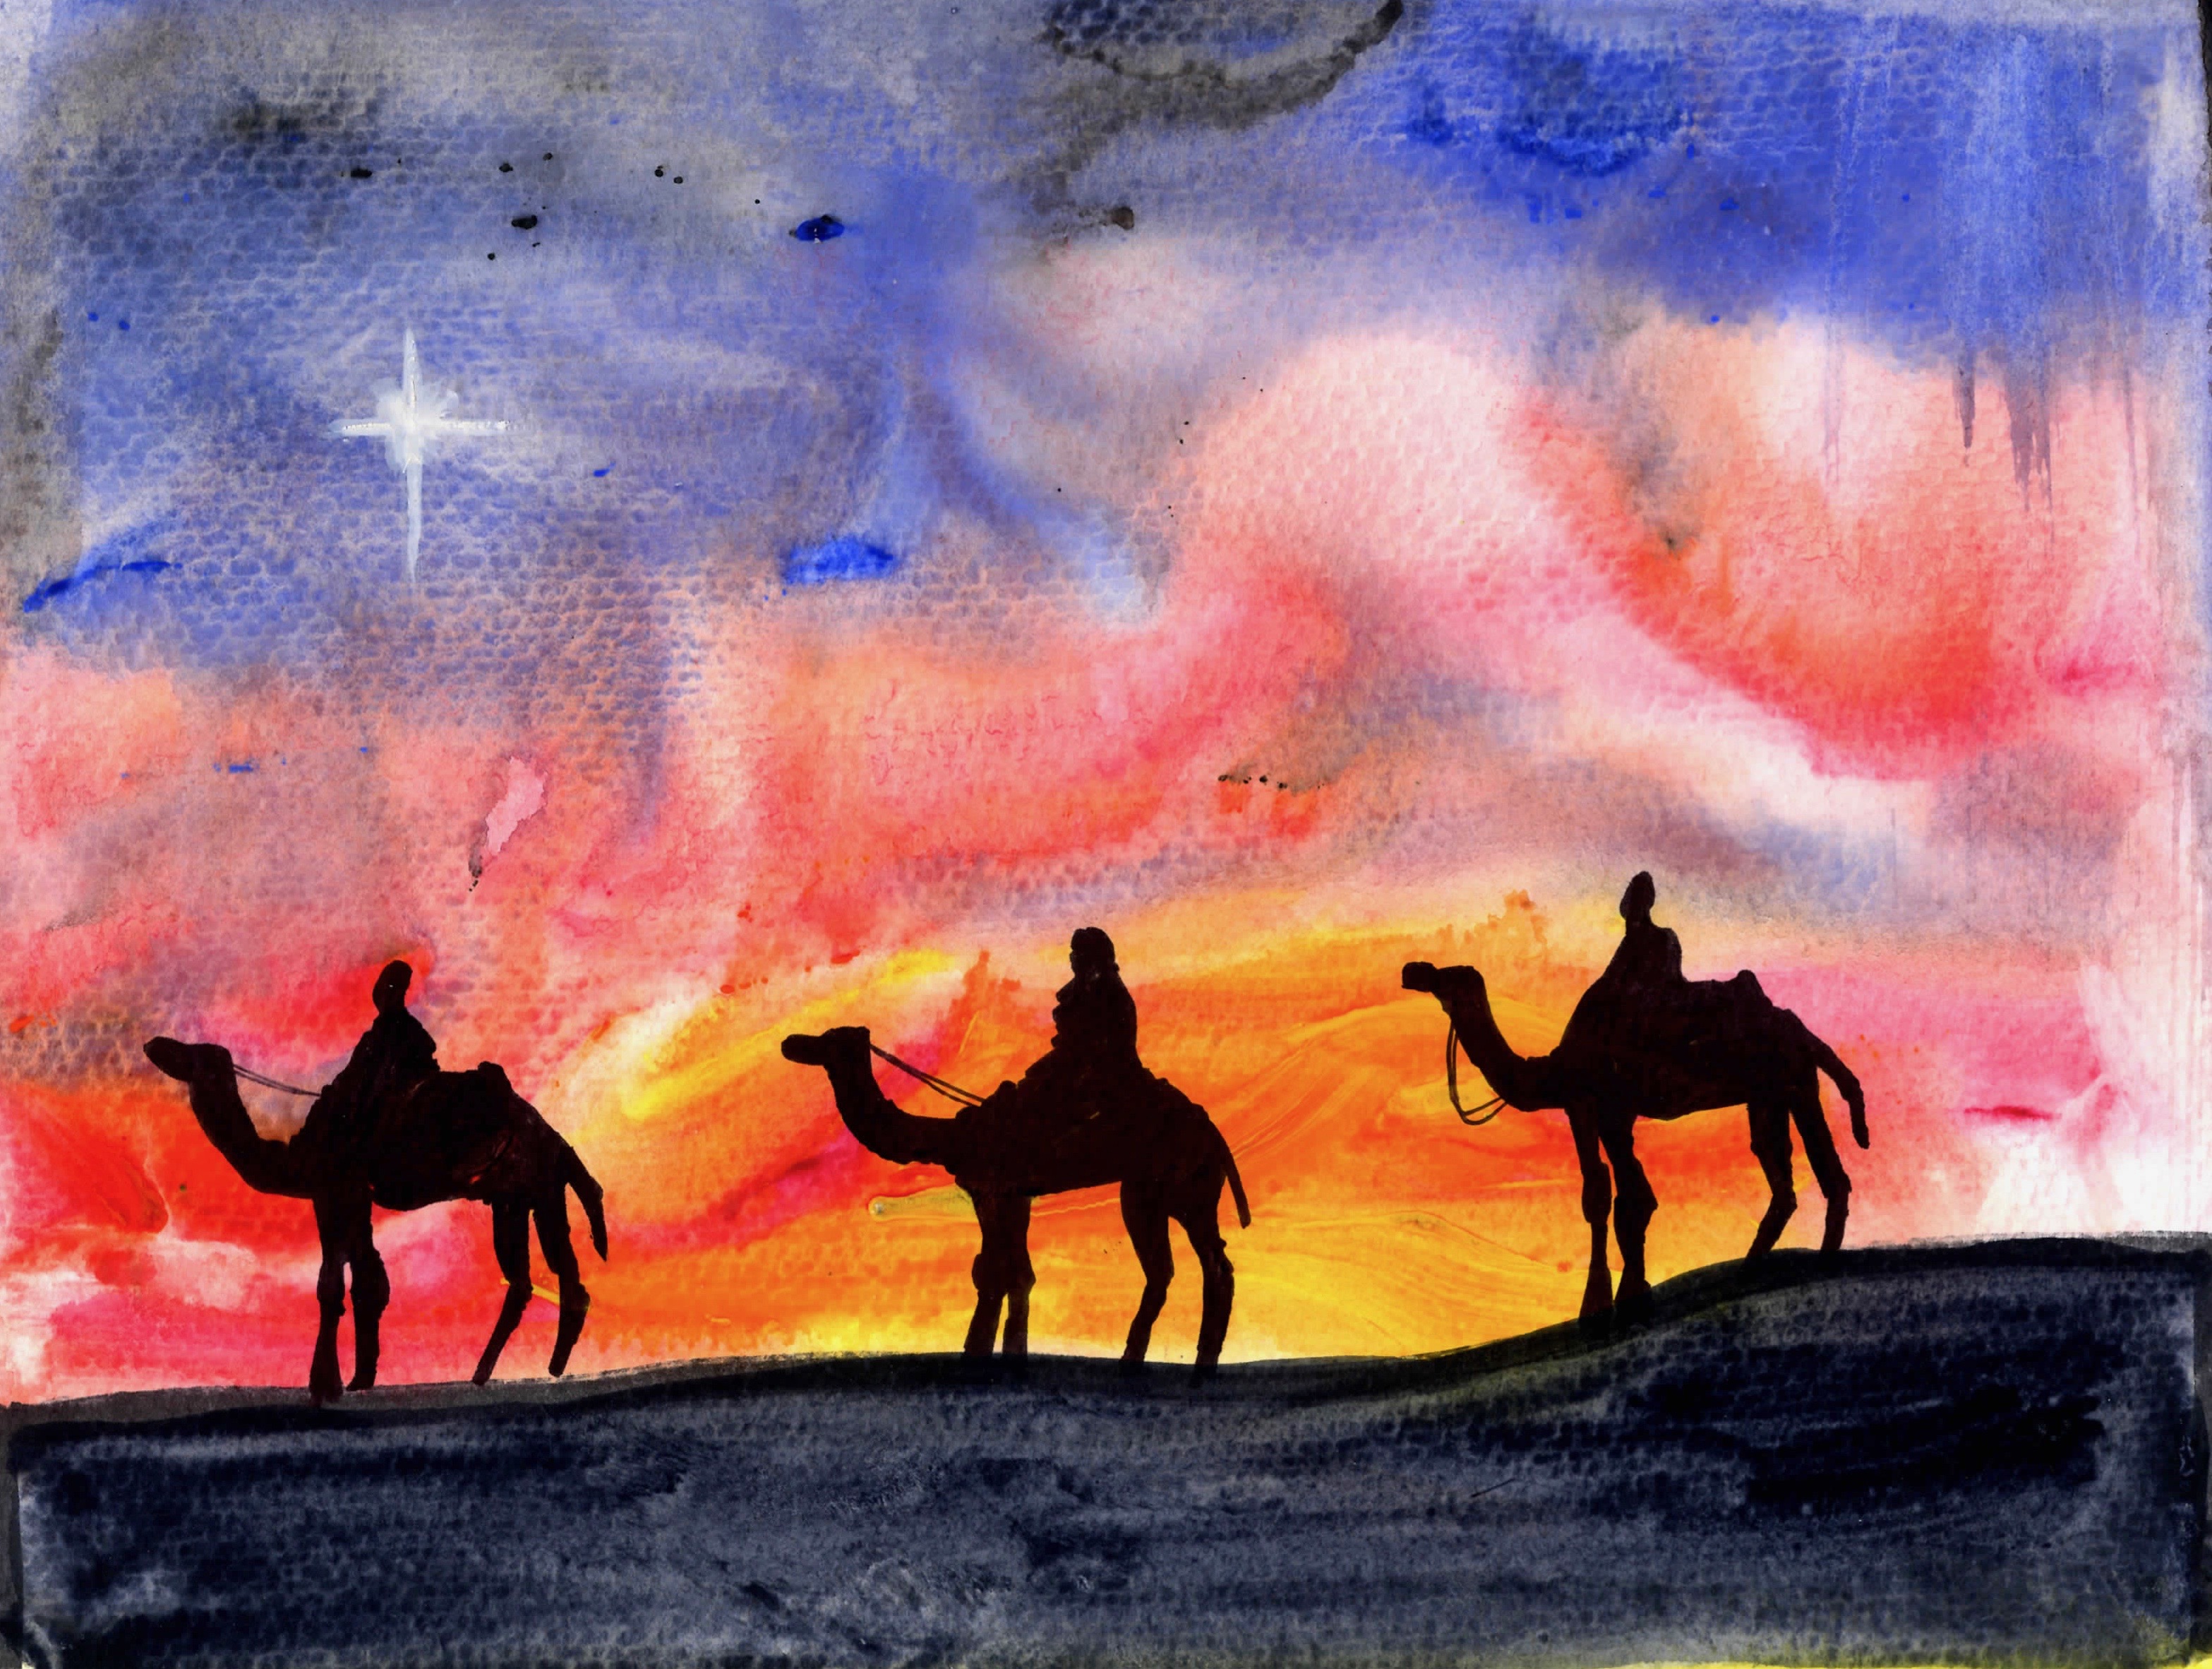 Three wise men on camels, walking along against a magnificently colored sky.